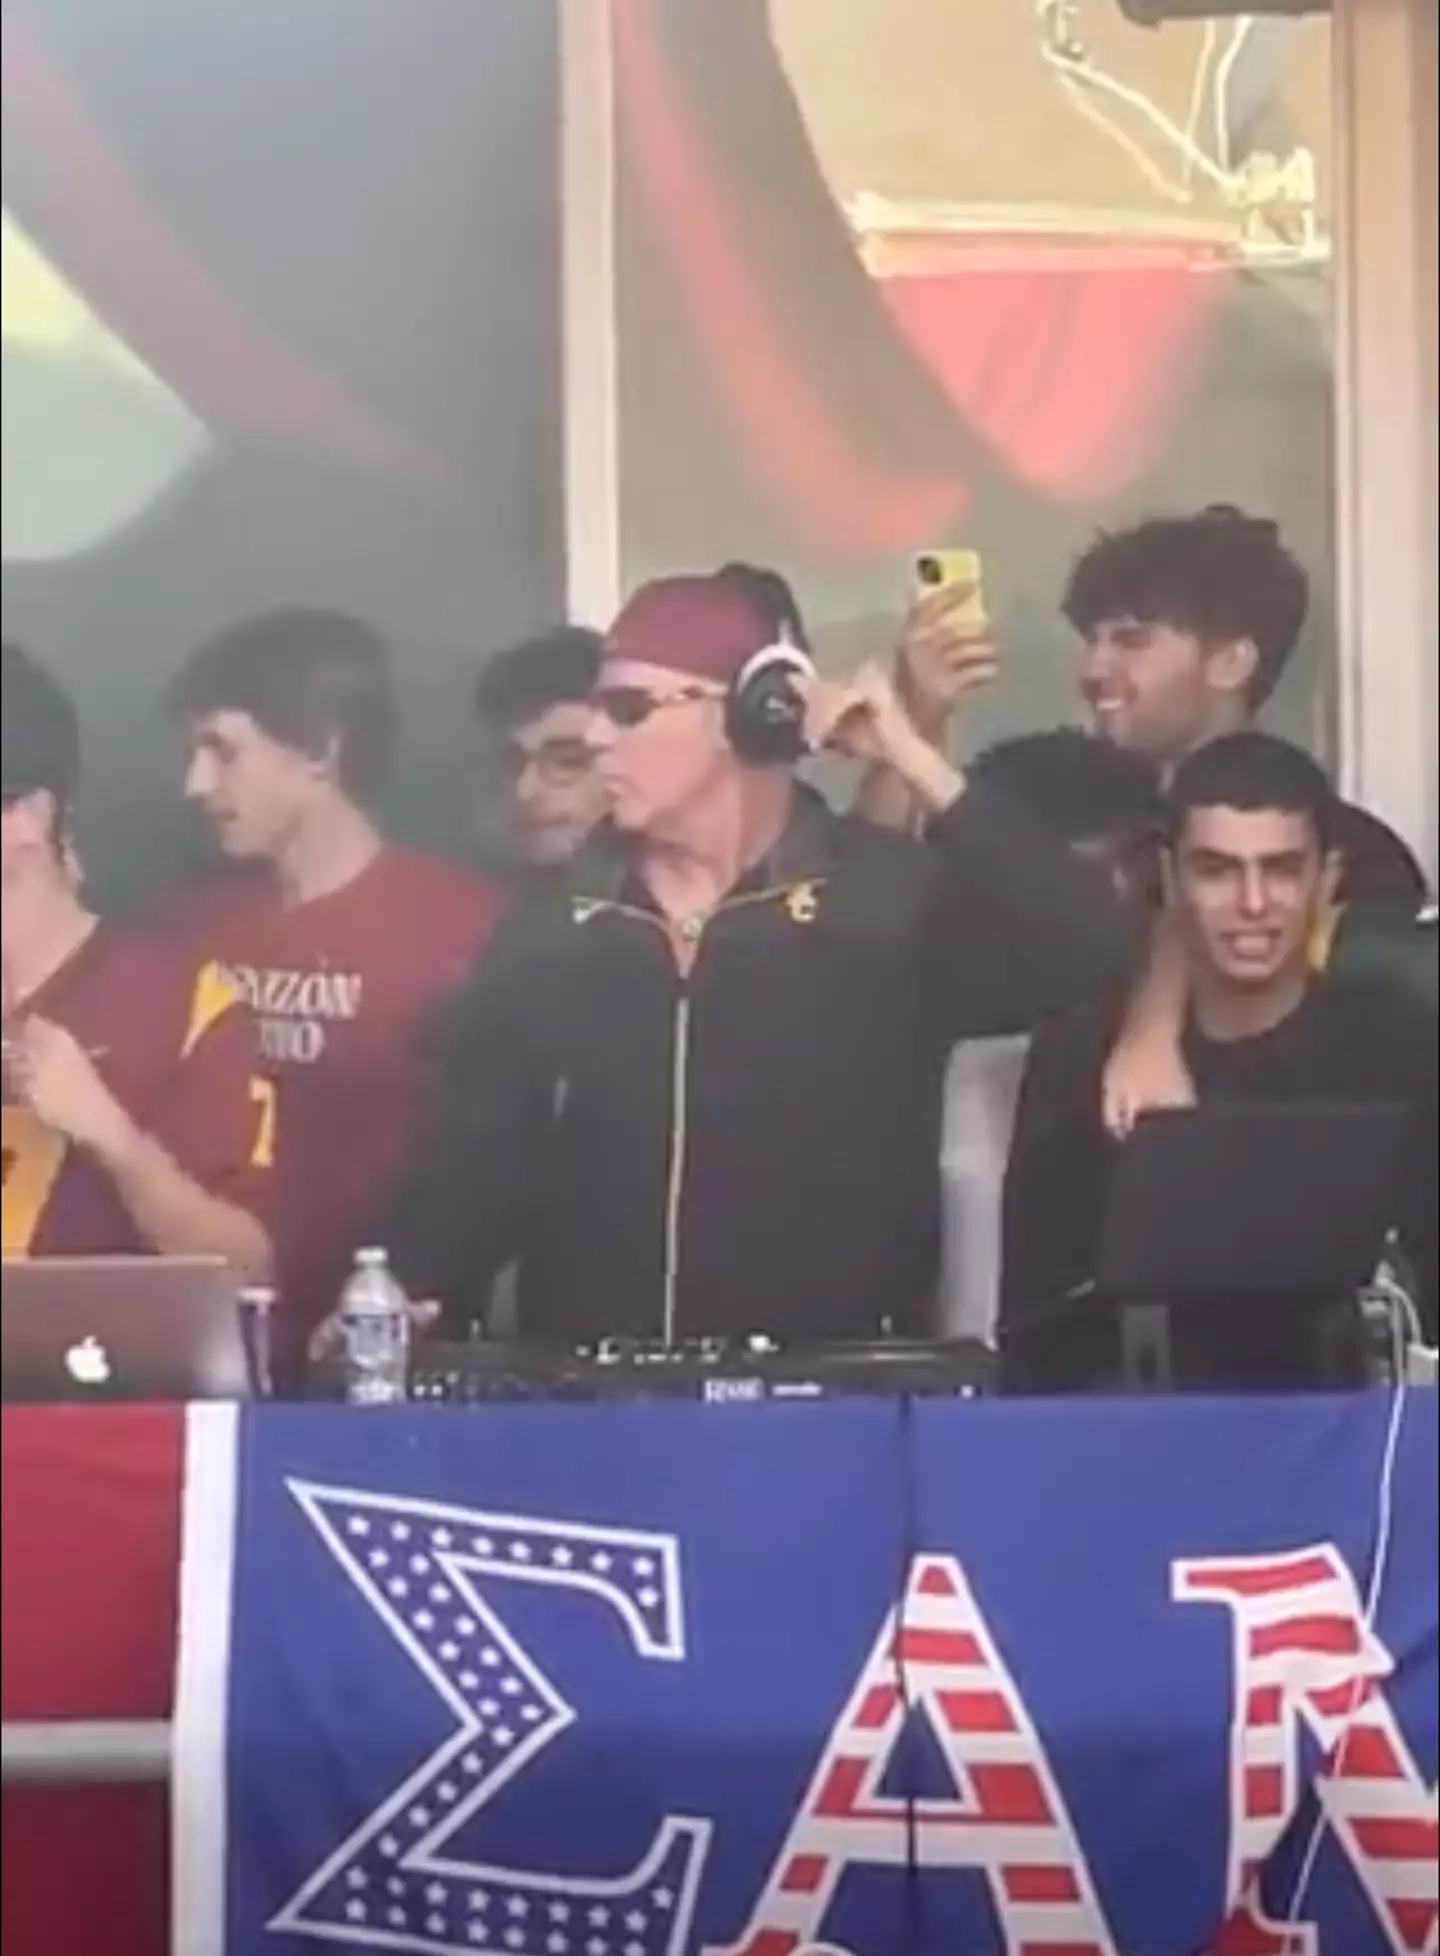 Will Ferrell seems to have a side-hustle as a DJ.